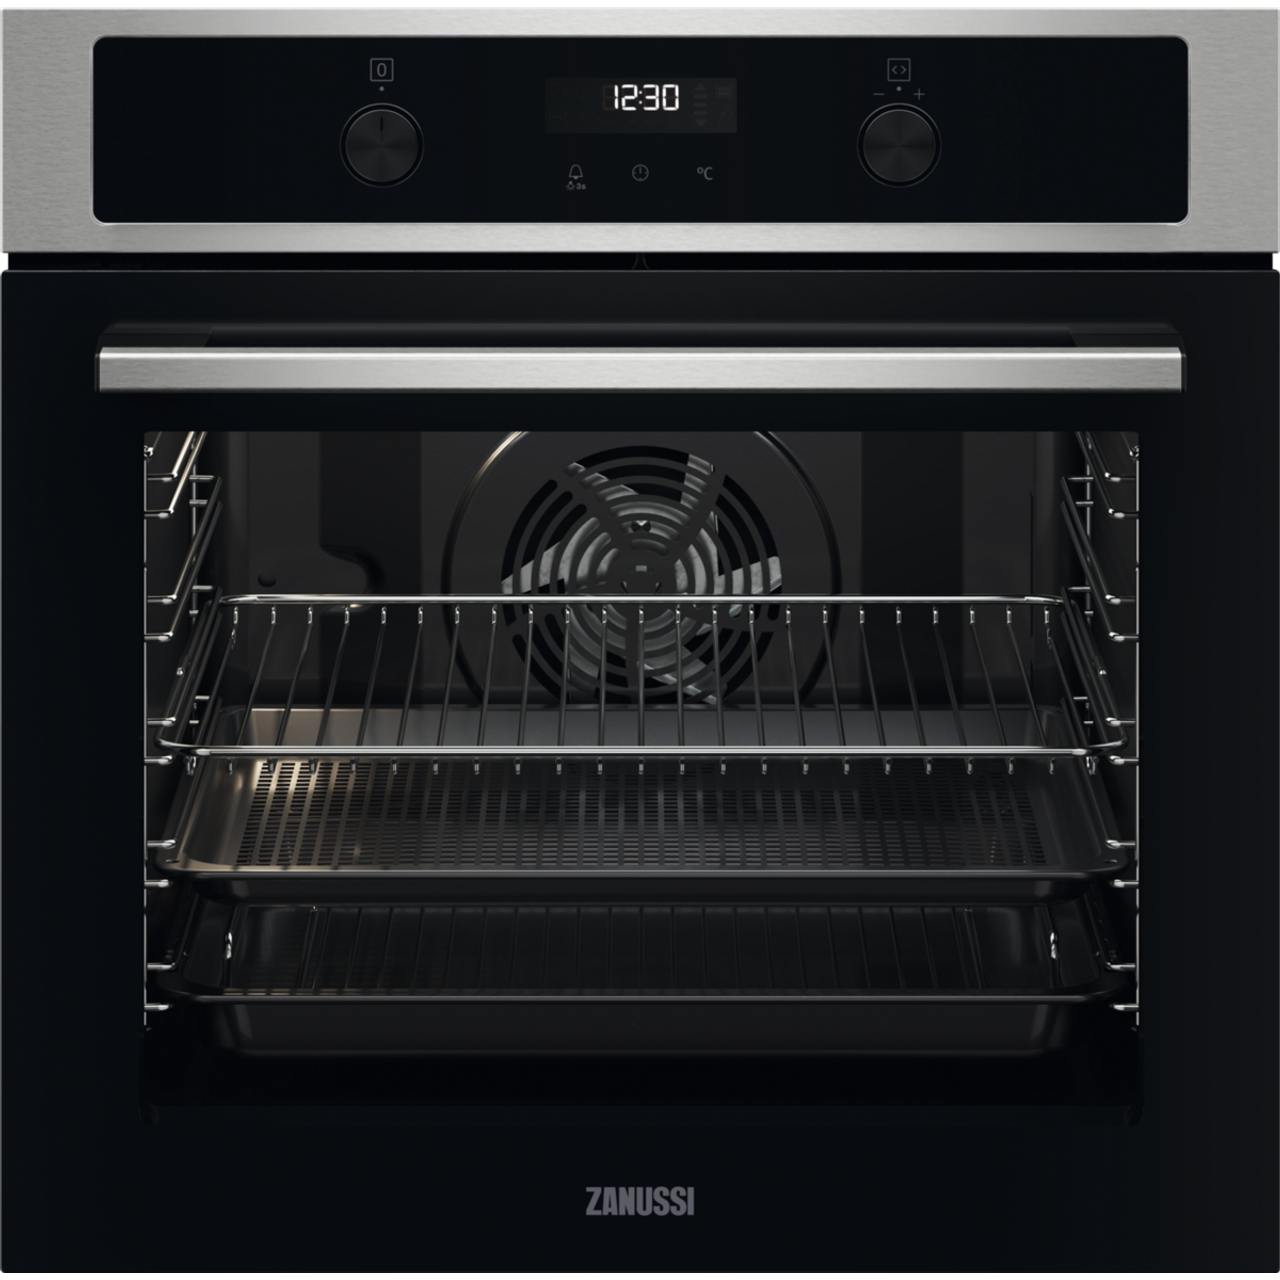 Zanussi ZOHNA7X1 Built In Electric Single Oven Review